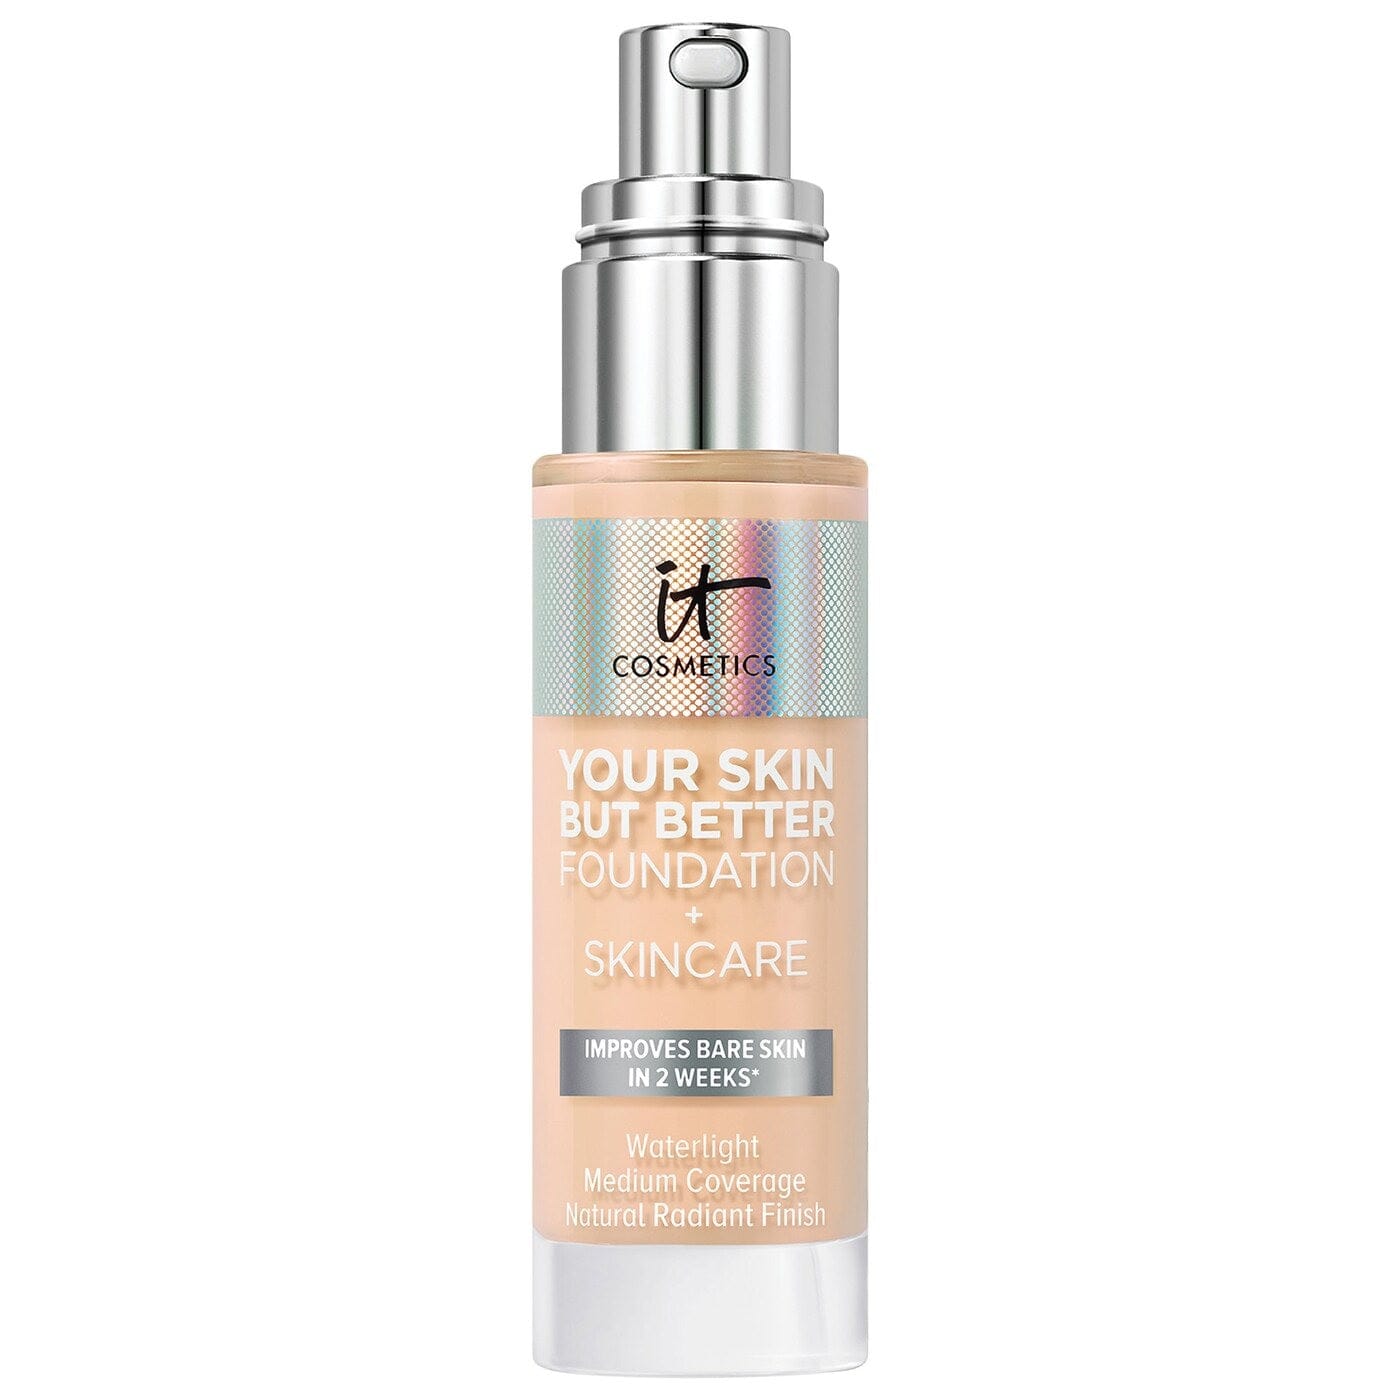 IT COSMETICS Beauty IT Cosmetics Your Skin But Better Foundation and Skincare 30ml - 20 Light Cool